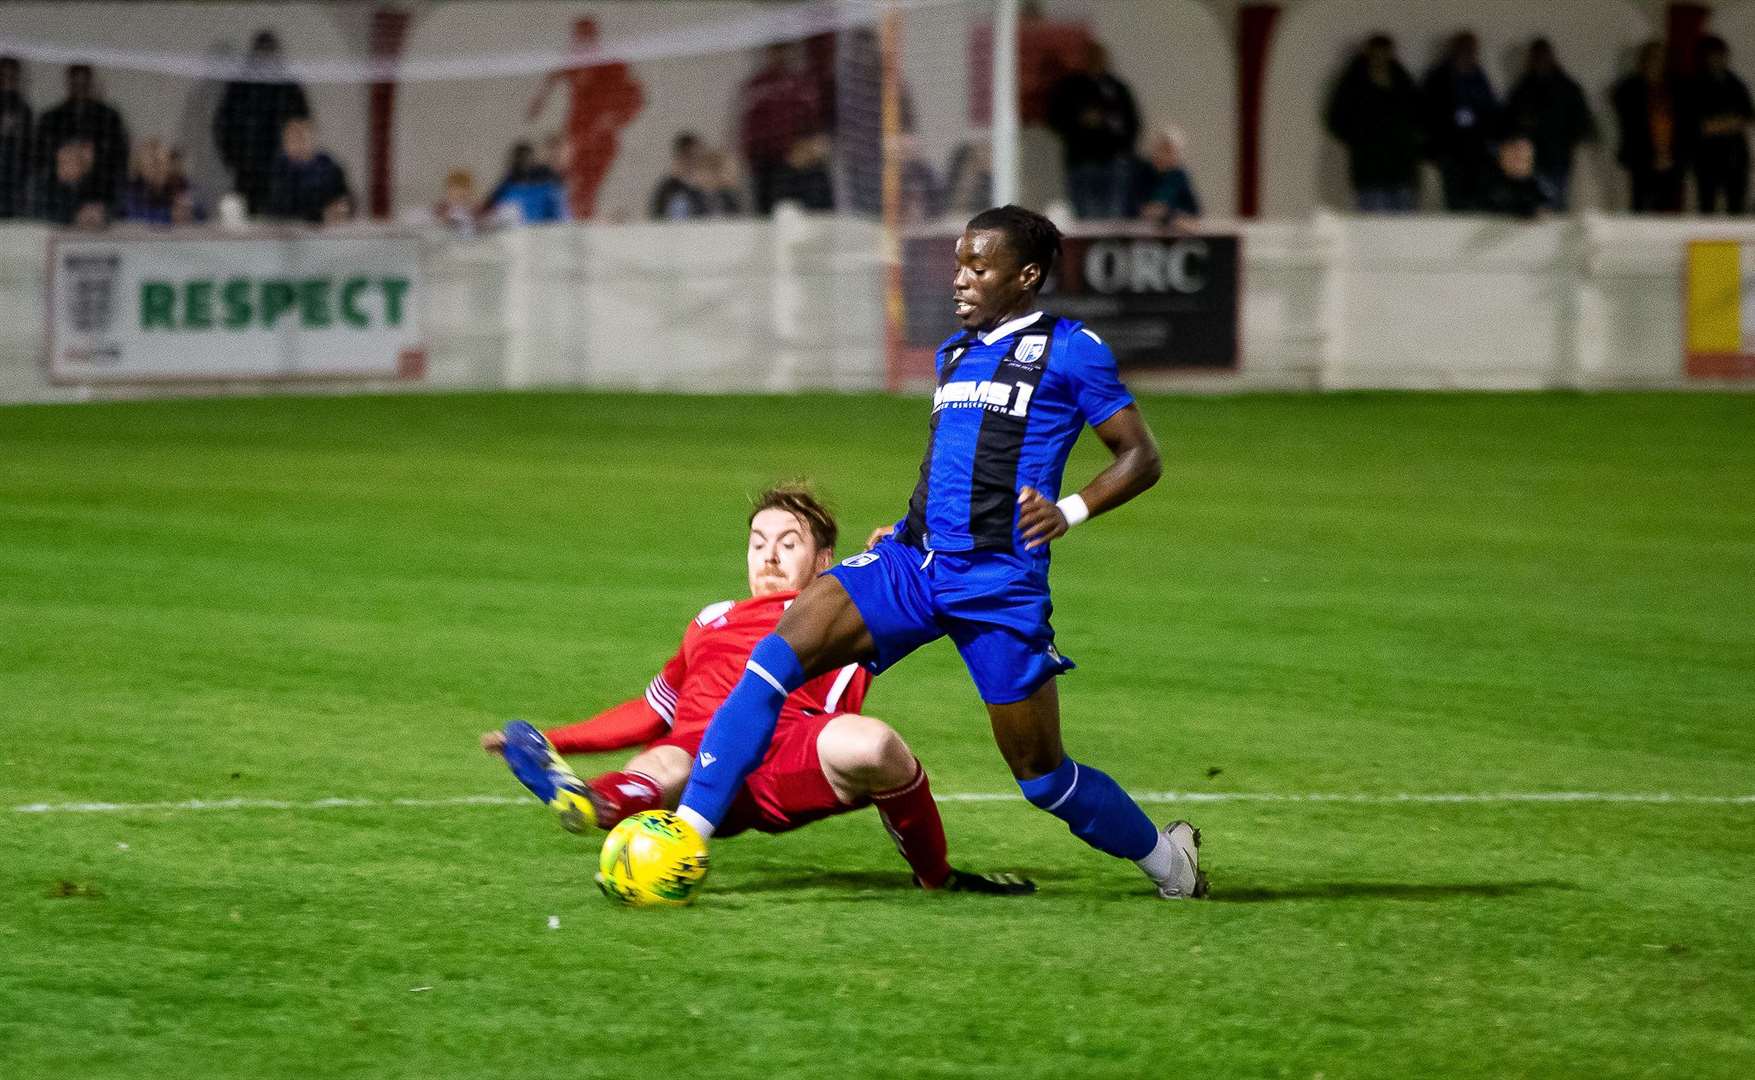 Jake Mackenzie slides in on Gerald Sithole as Whitstable take on Gillingham Picture: Les Biggs